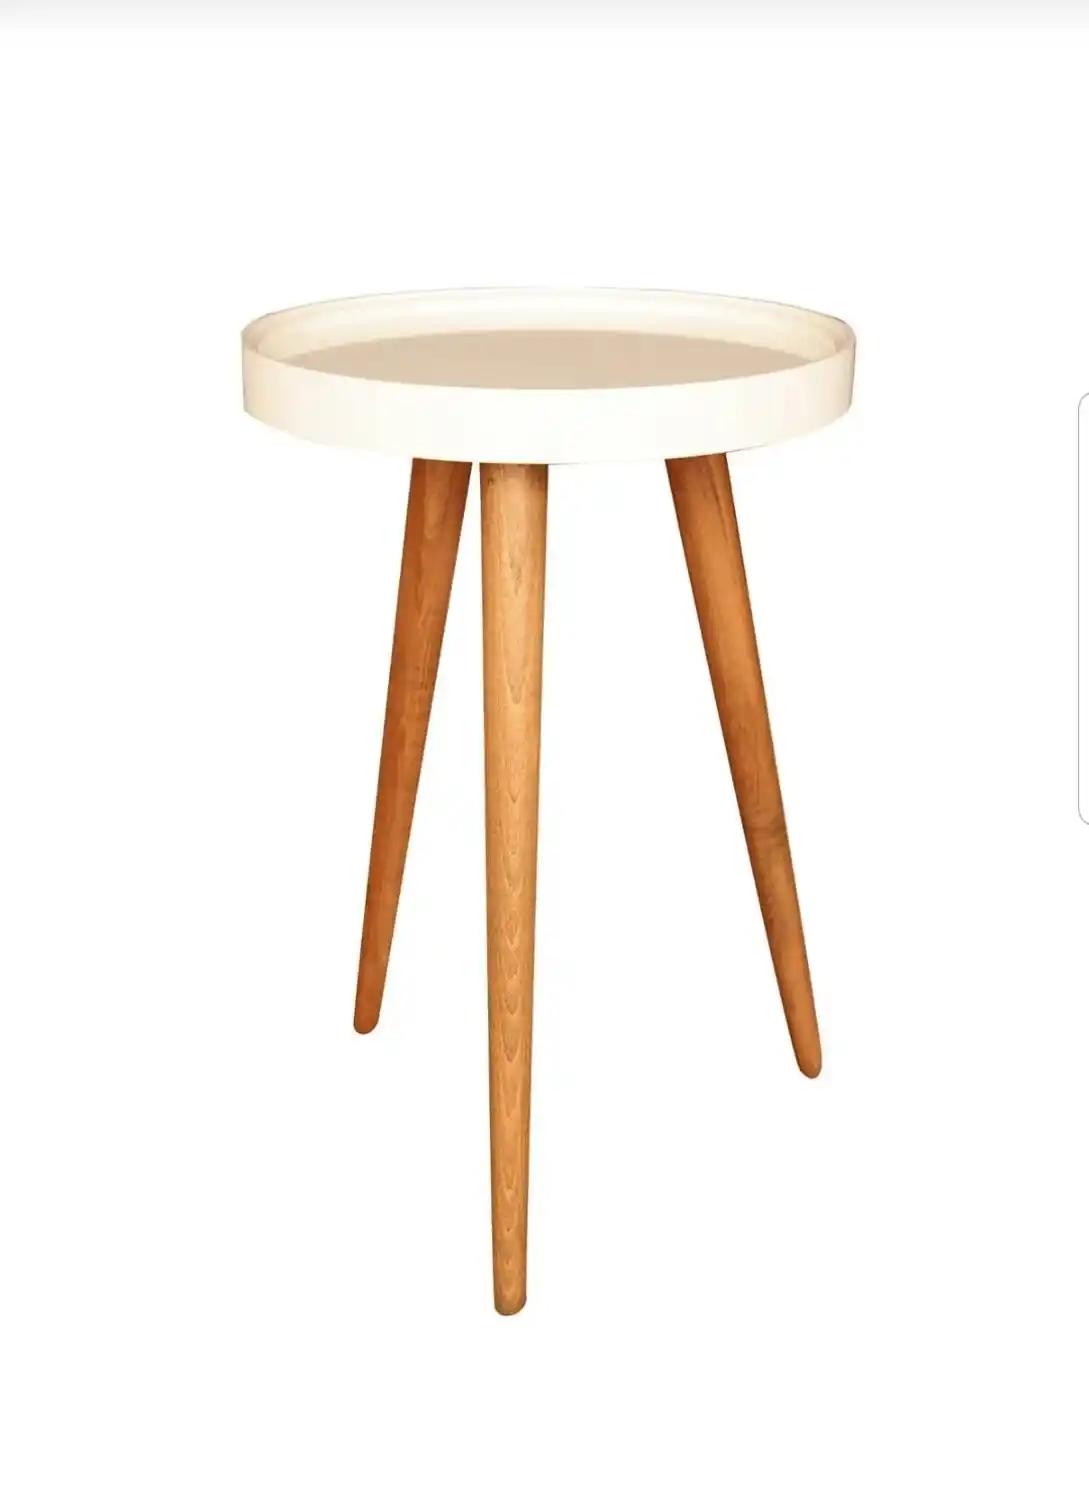 Home Side Table Furniture Round Coffee Table For Living Room Small Bedside Table Design End Table Sofaside Minimalist Small Desk Akhir Tabel Aliexpress